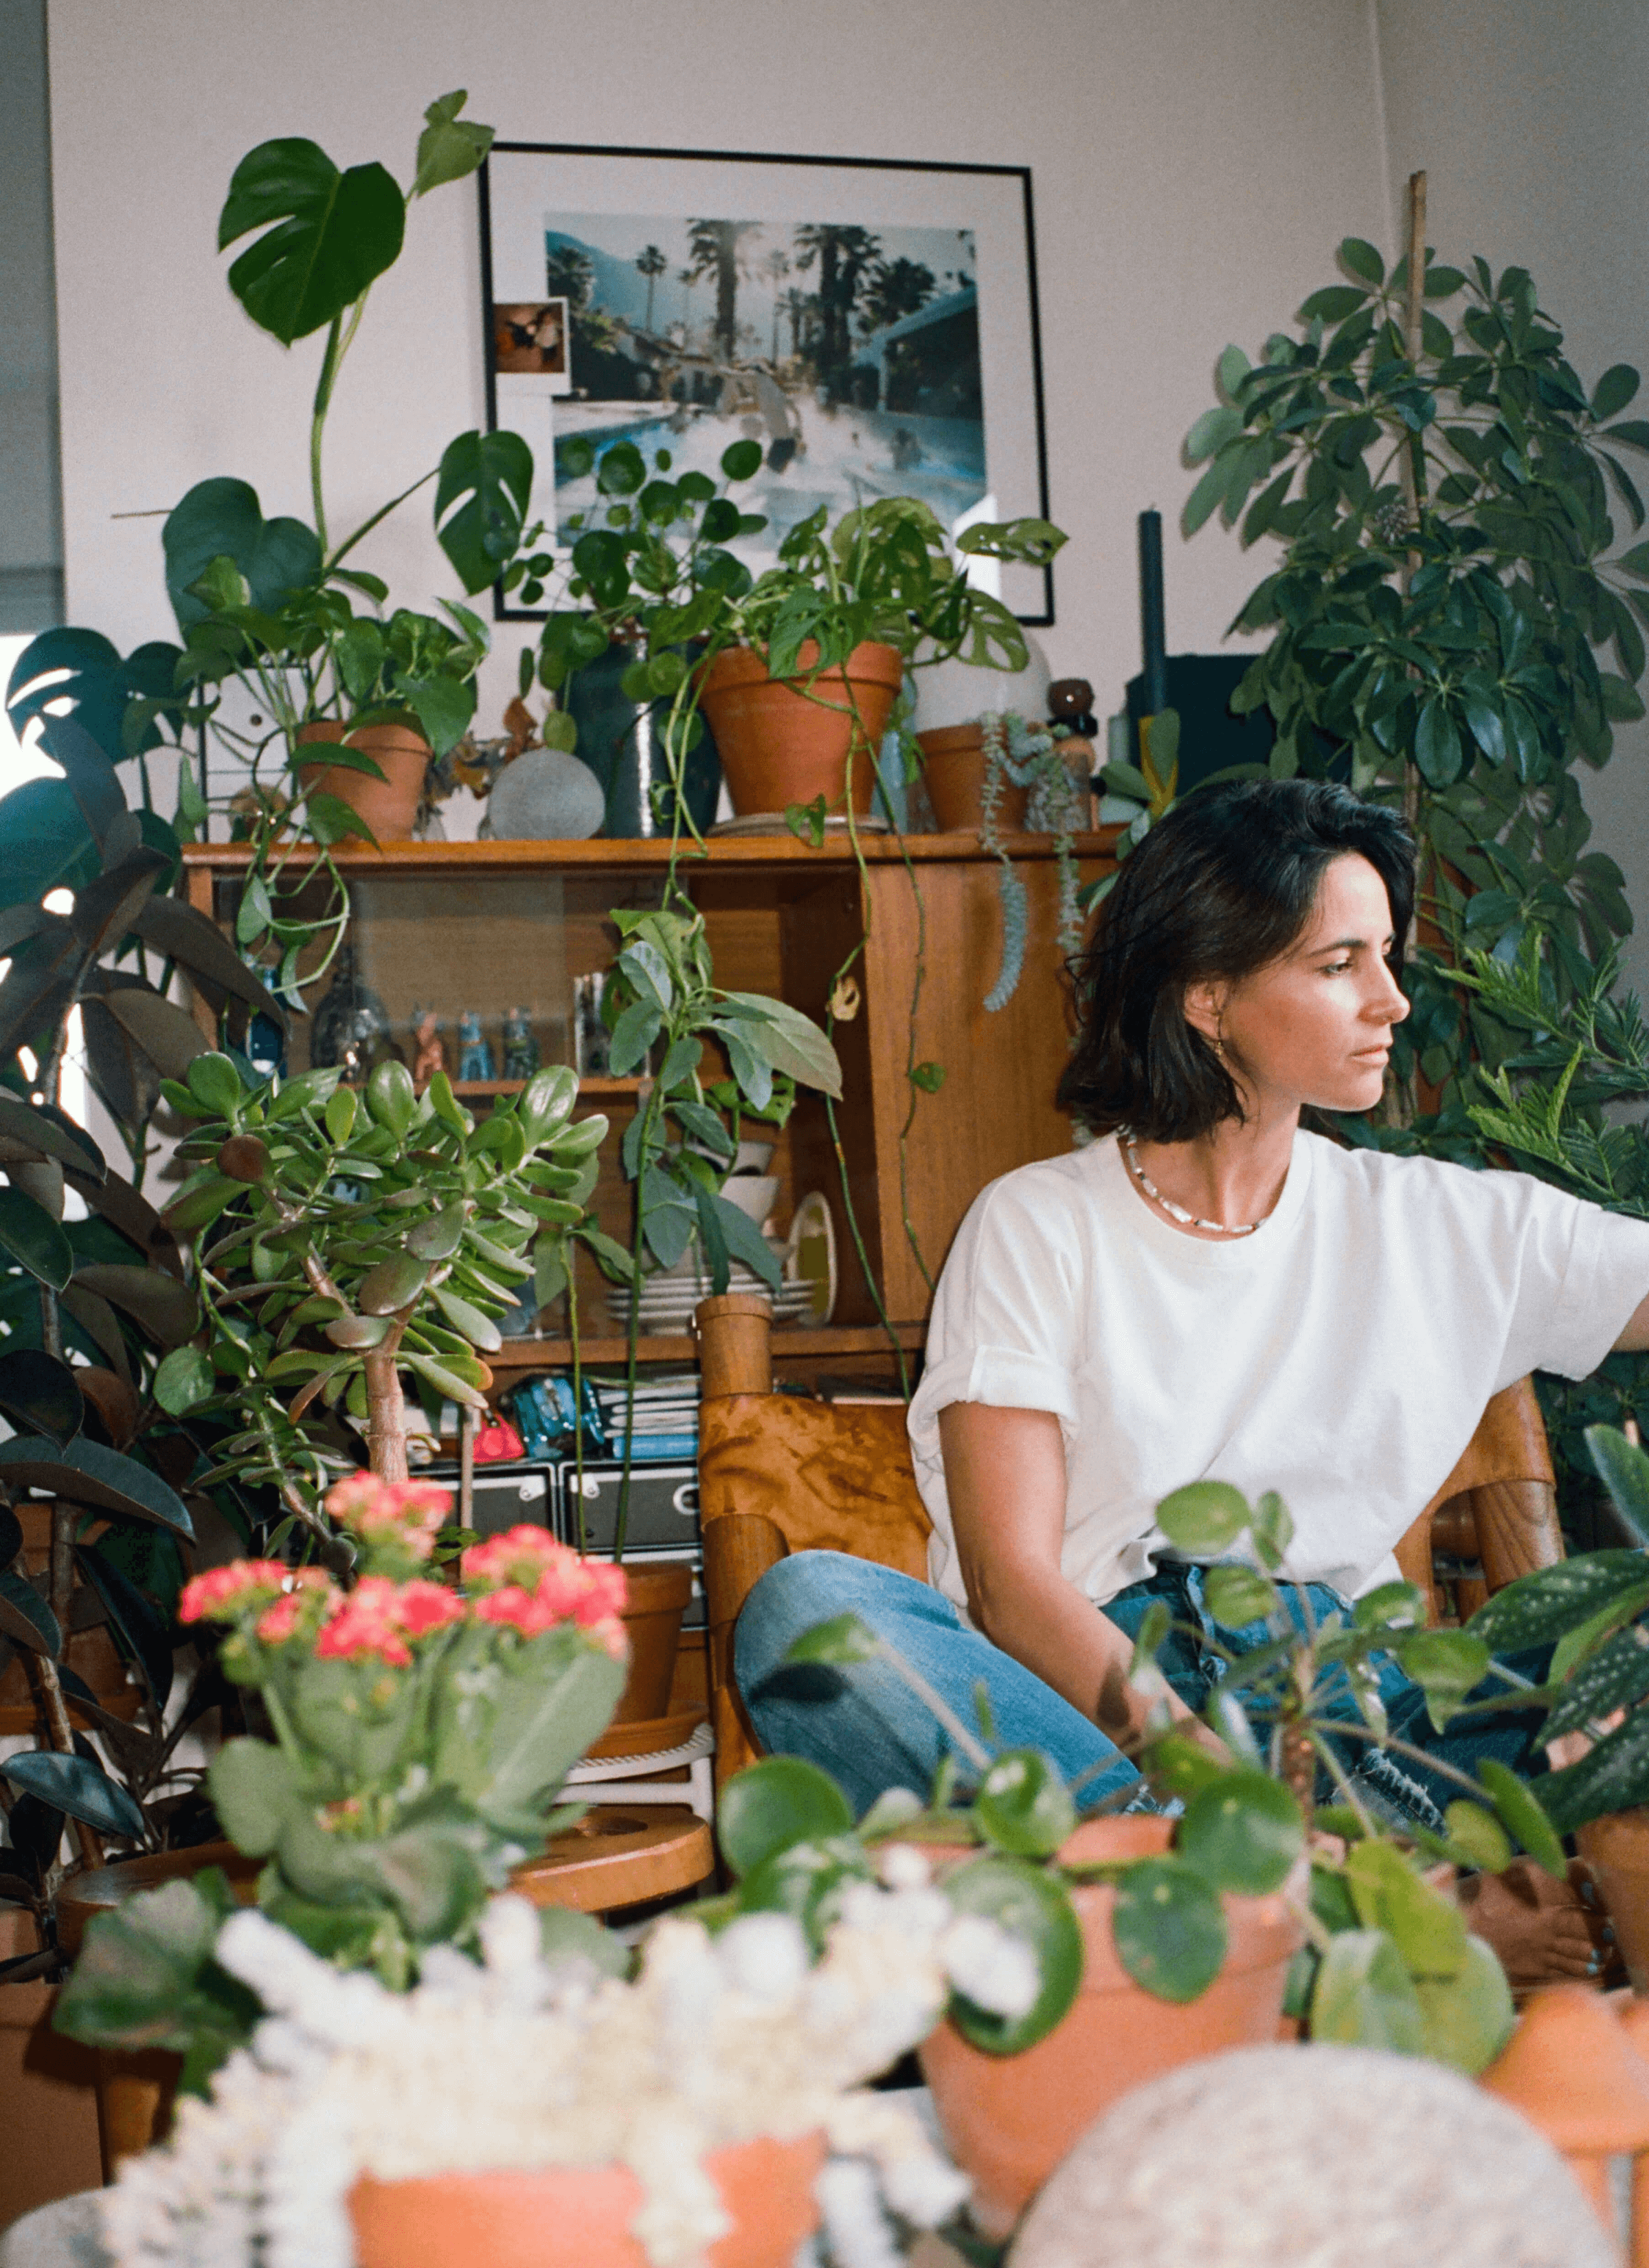 A photoshoot of Leslie David sitting in her studio surrounded by a collection of plants and flowers.